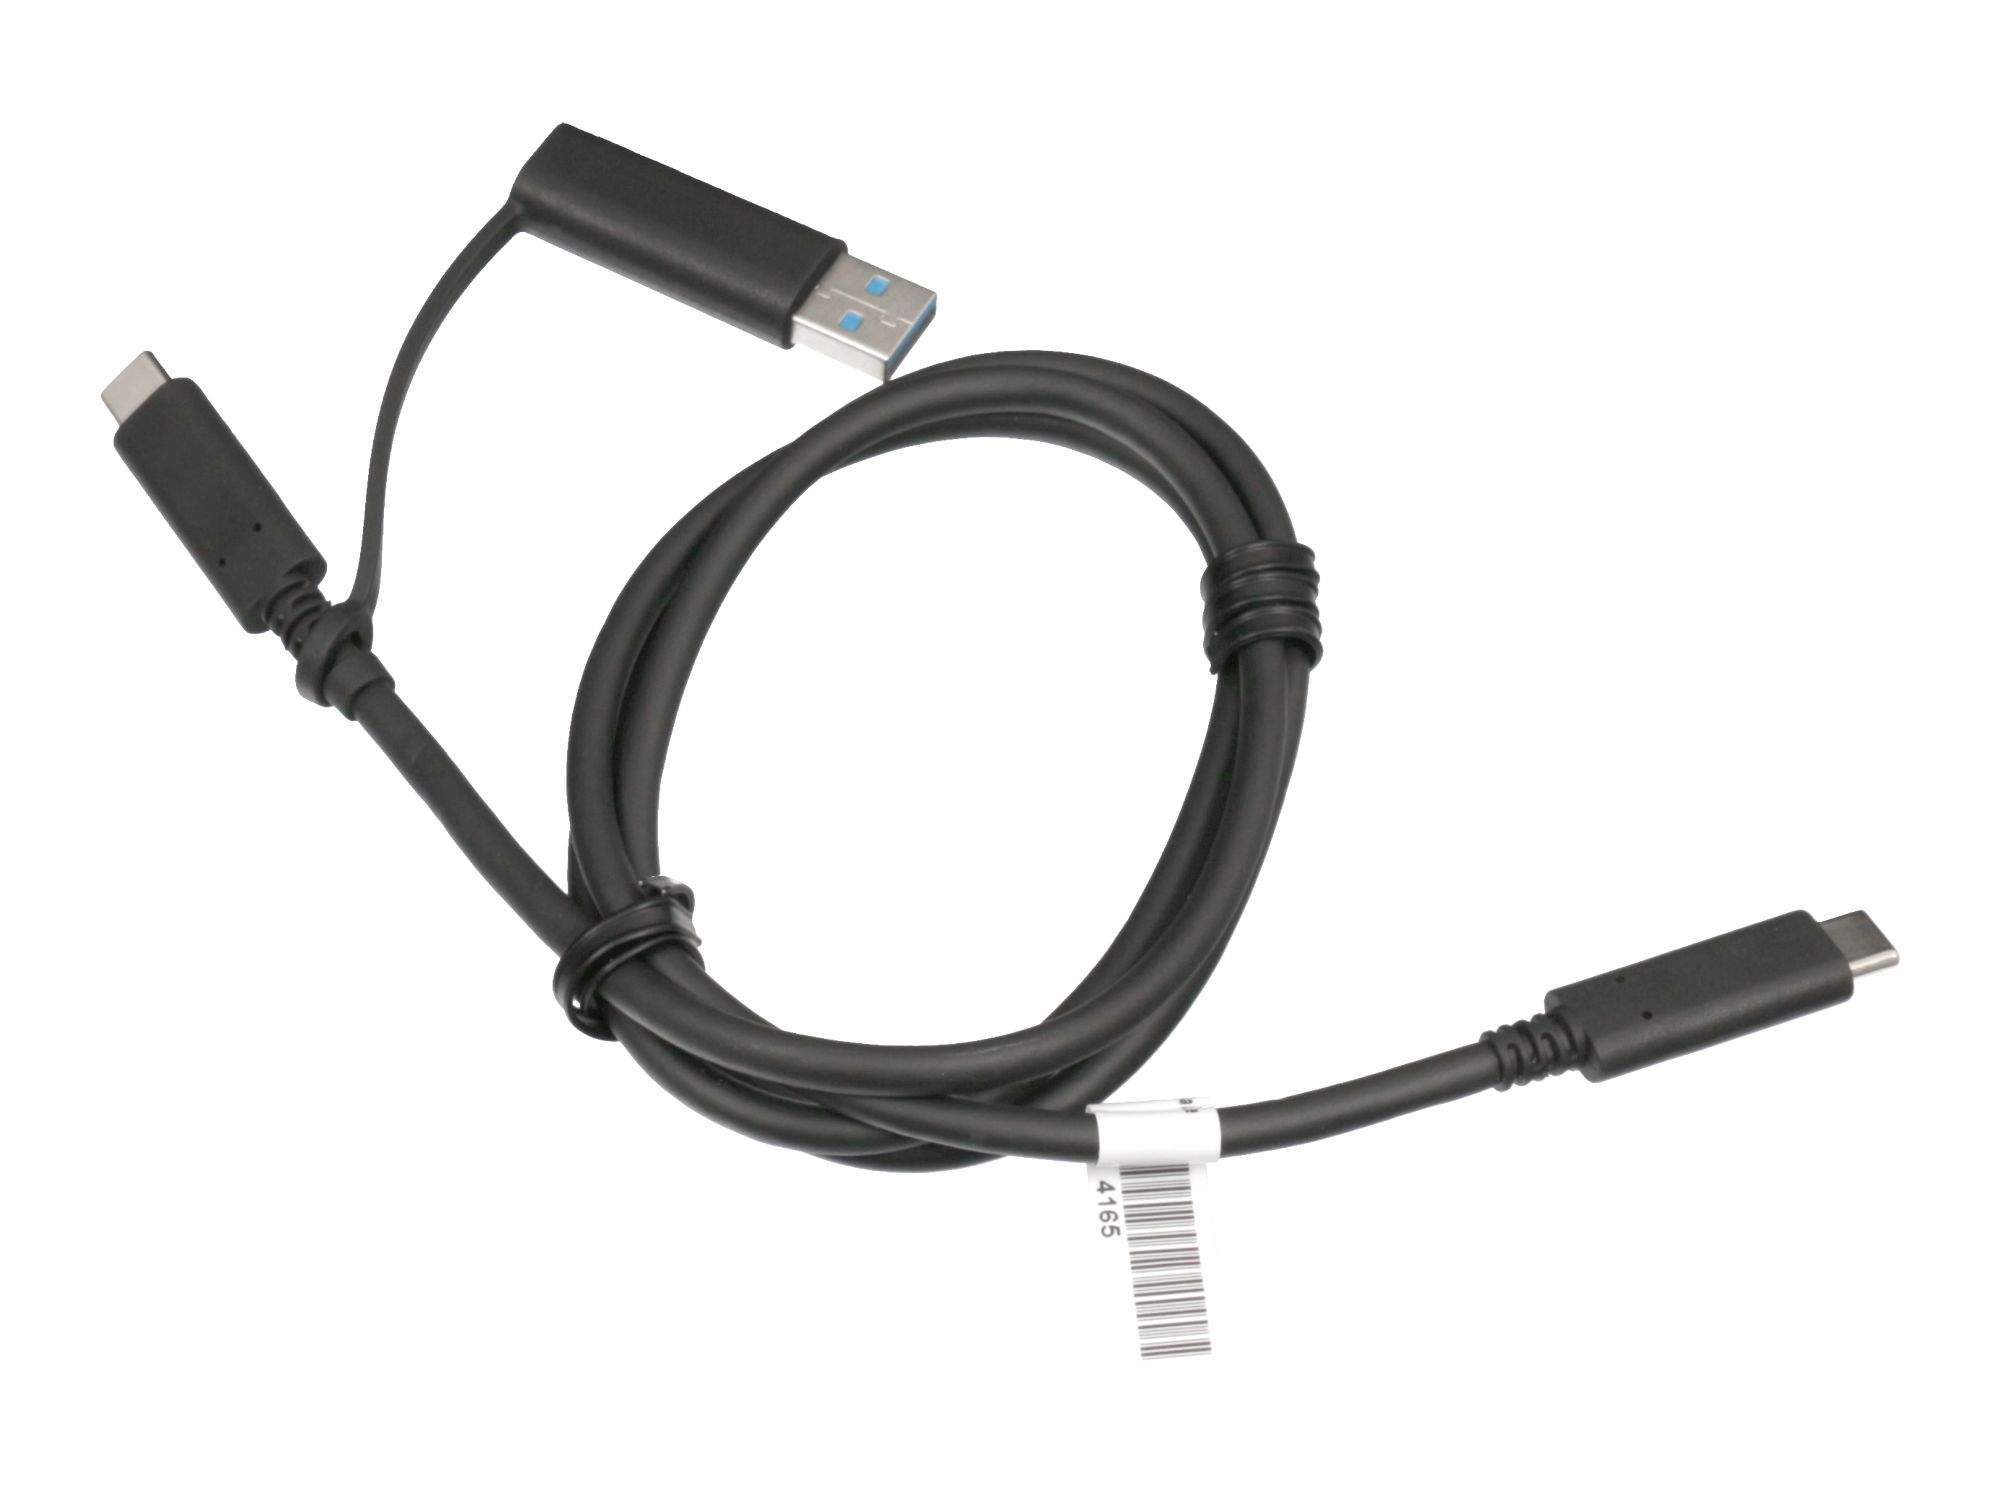 LENOVO USB-C Cable W/ Dongle TP